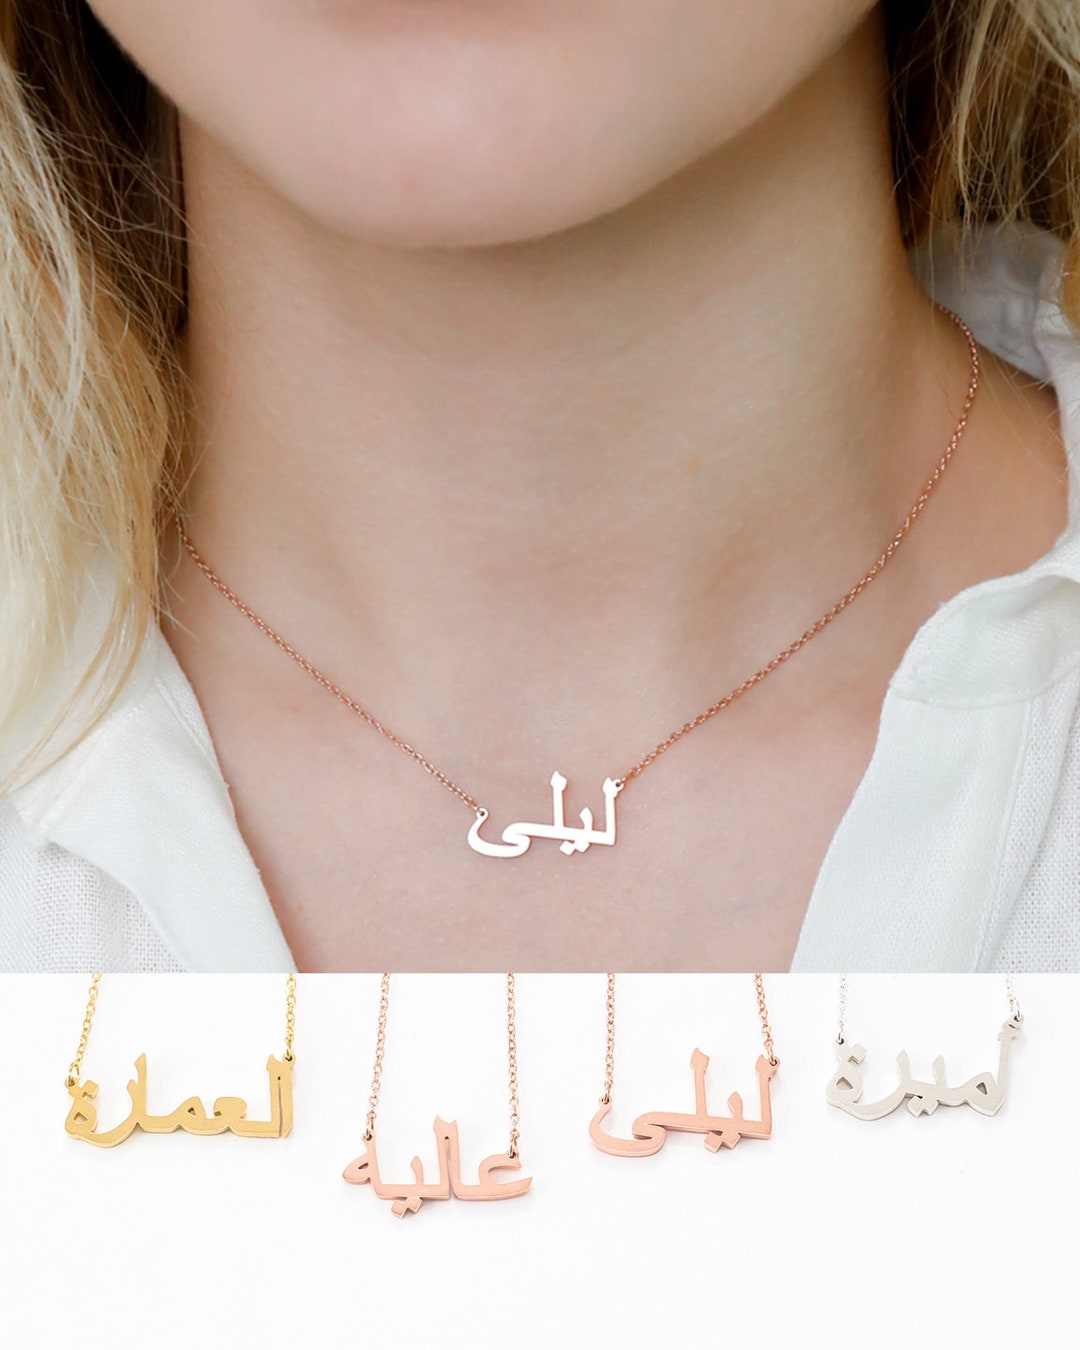 Personalized Arabic Name Necklace - Silver & Gold Custom Arabic Necklace